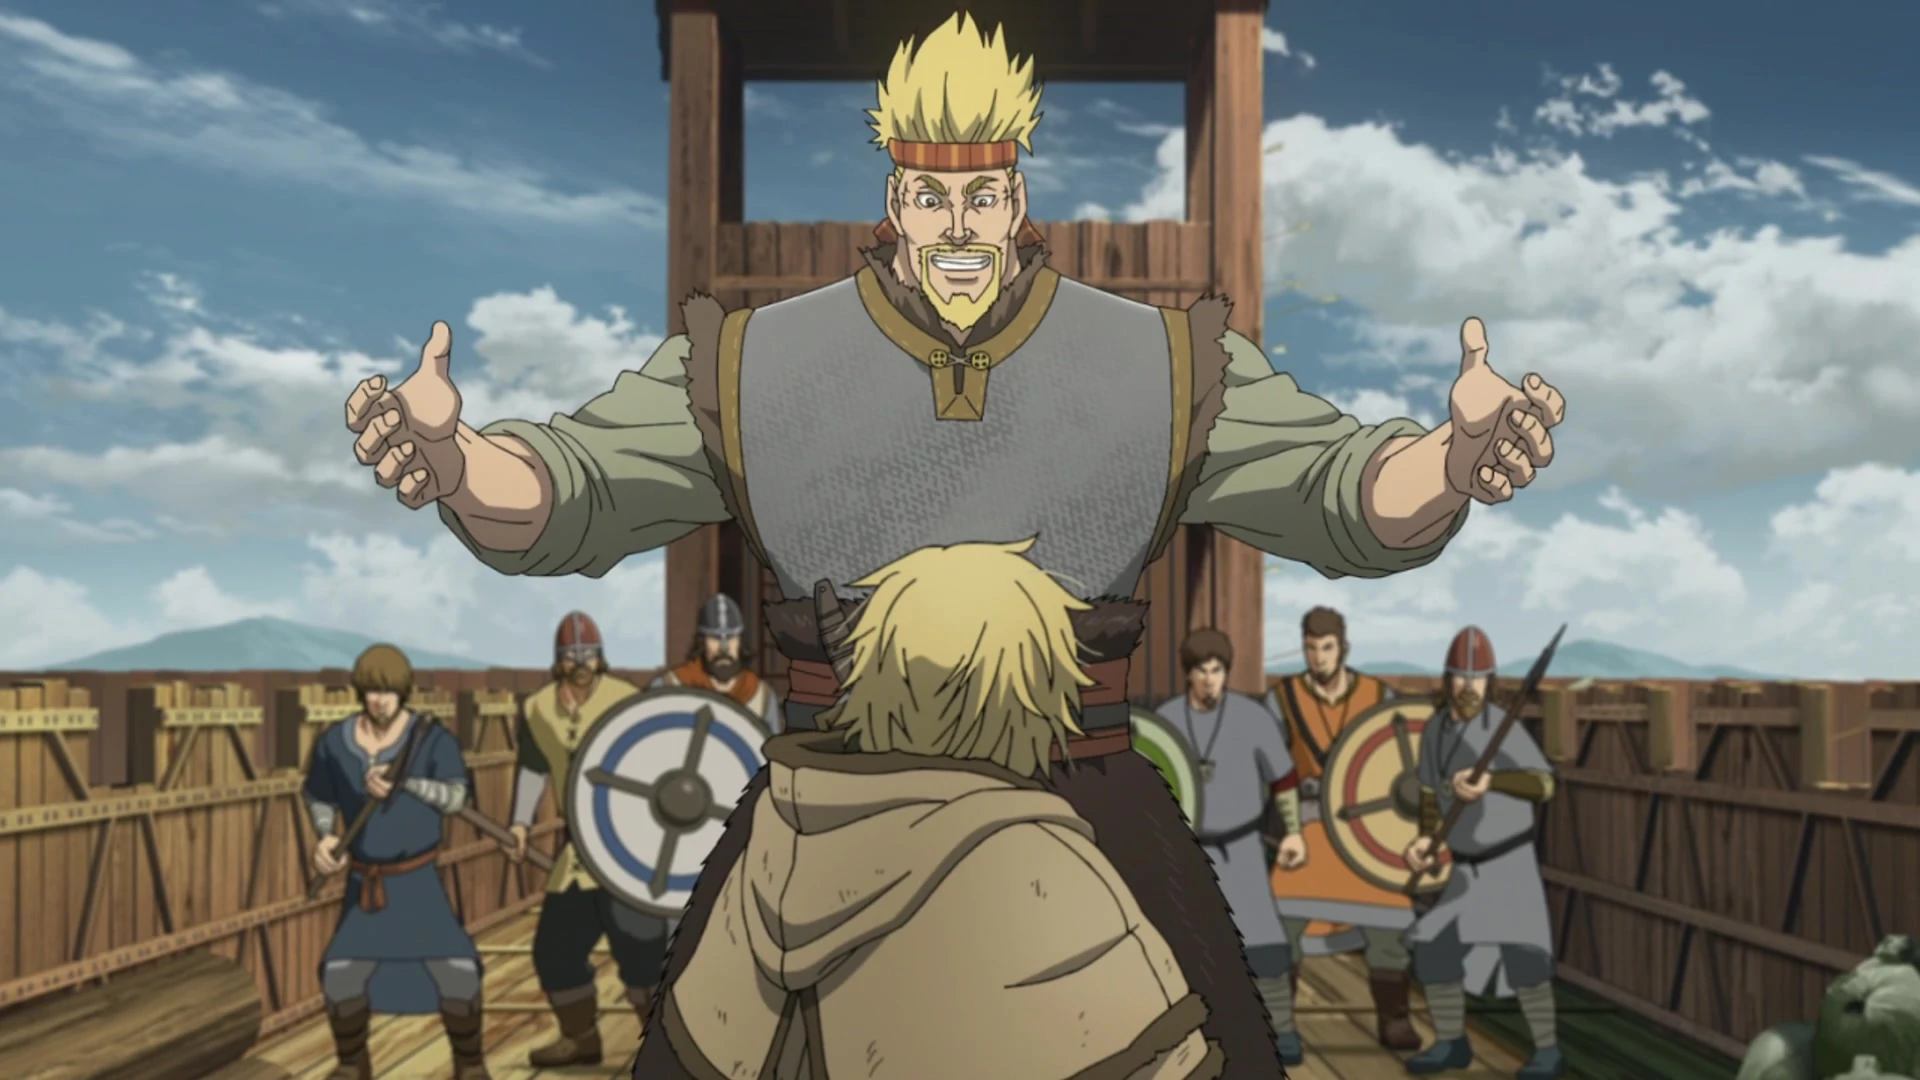 Teen Thorfinn in a fight with Thorkell.